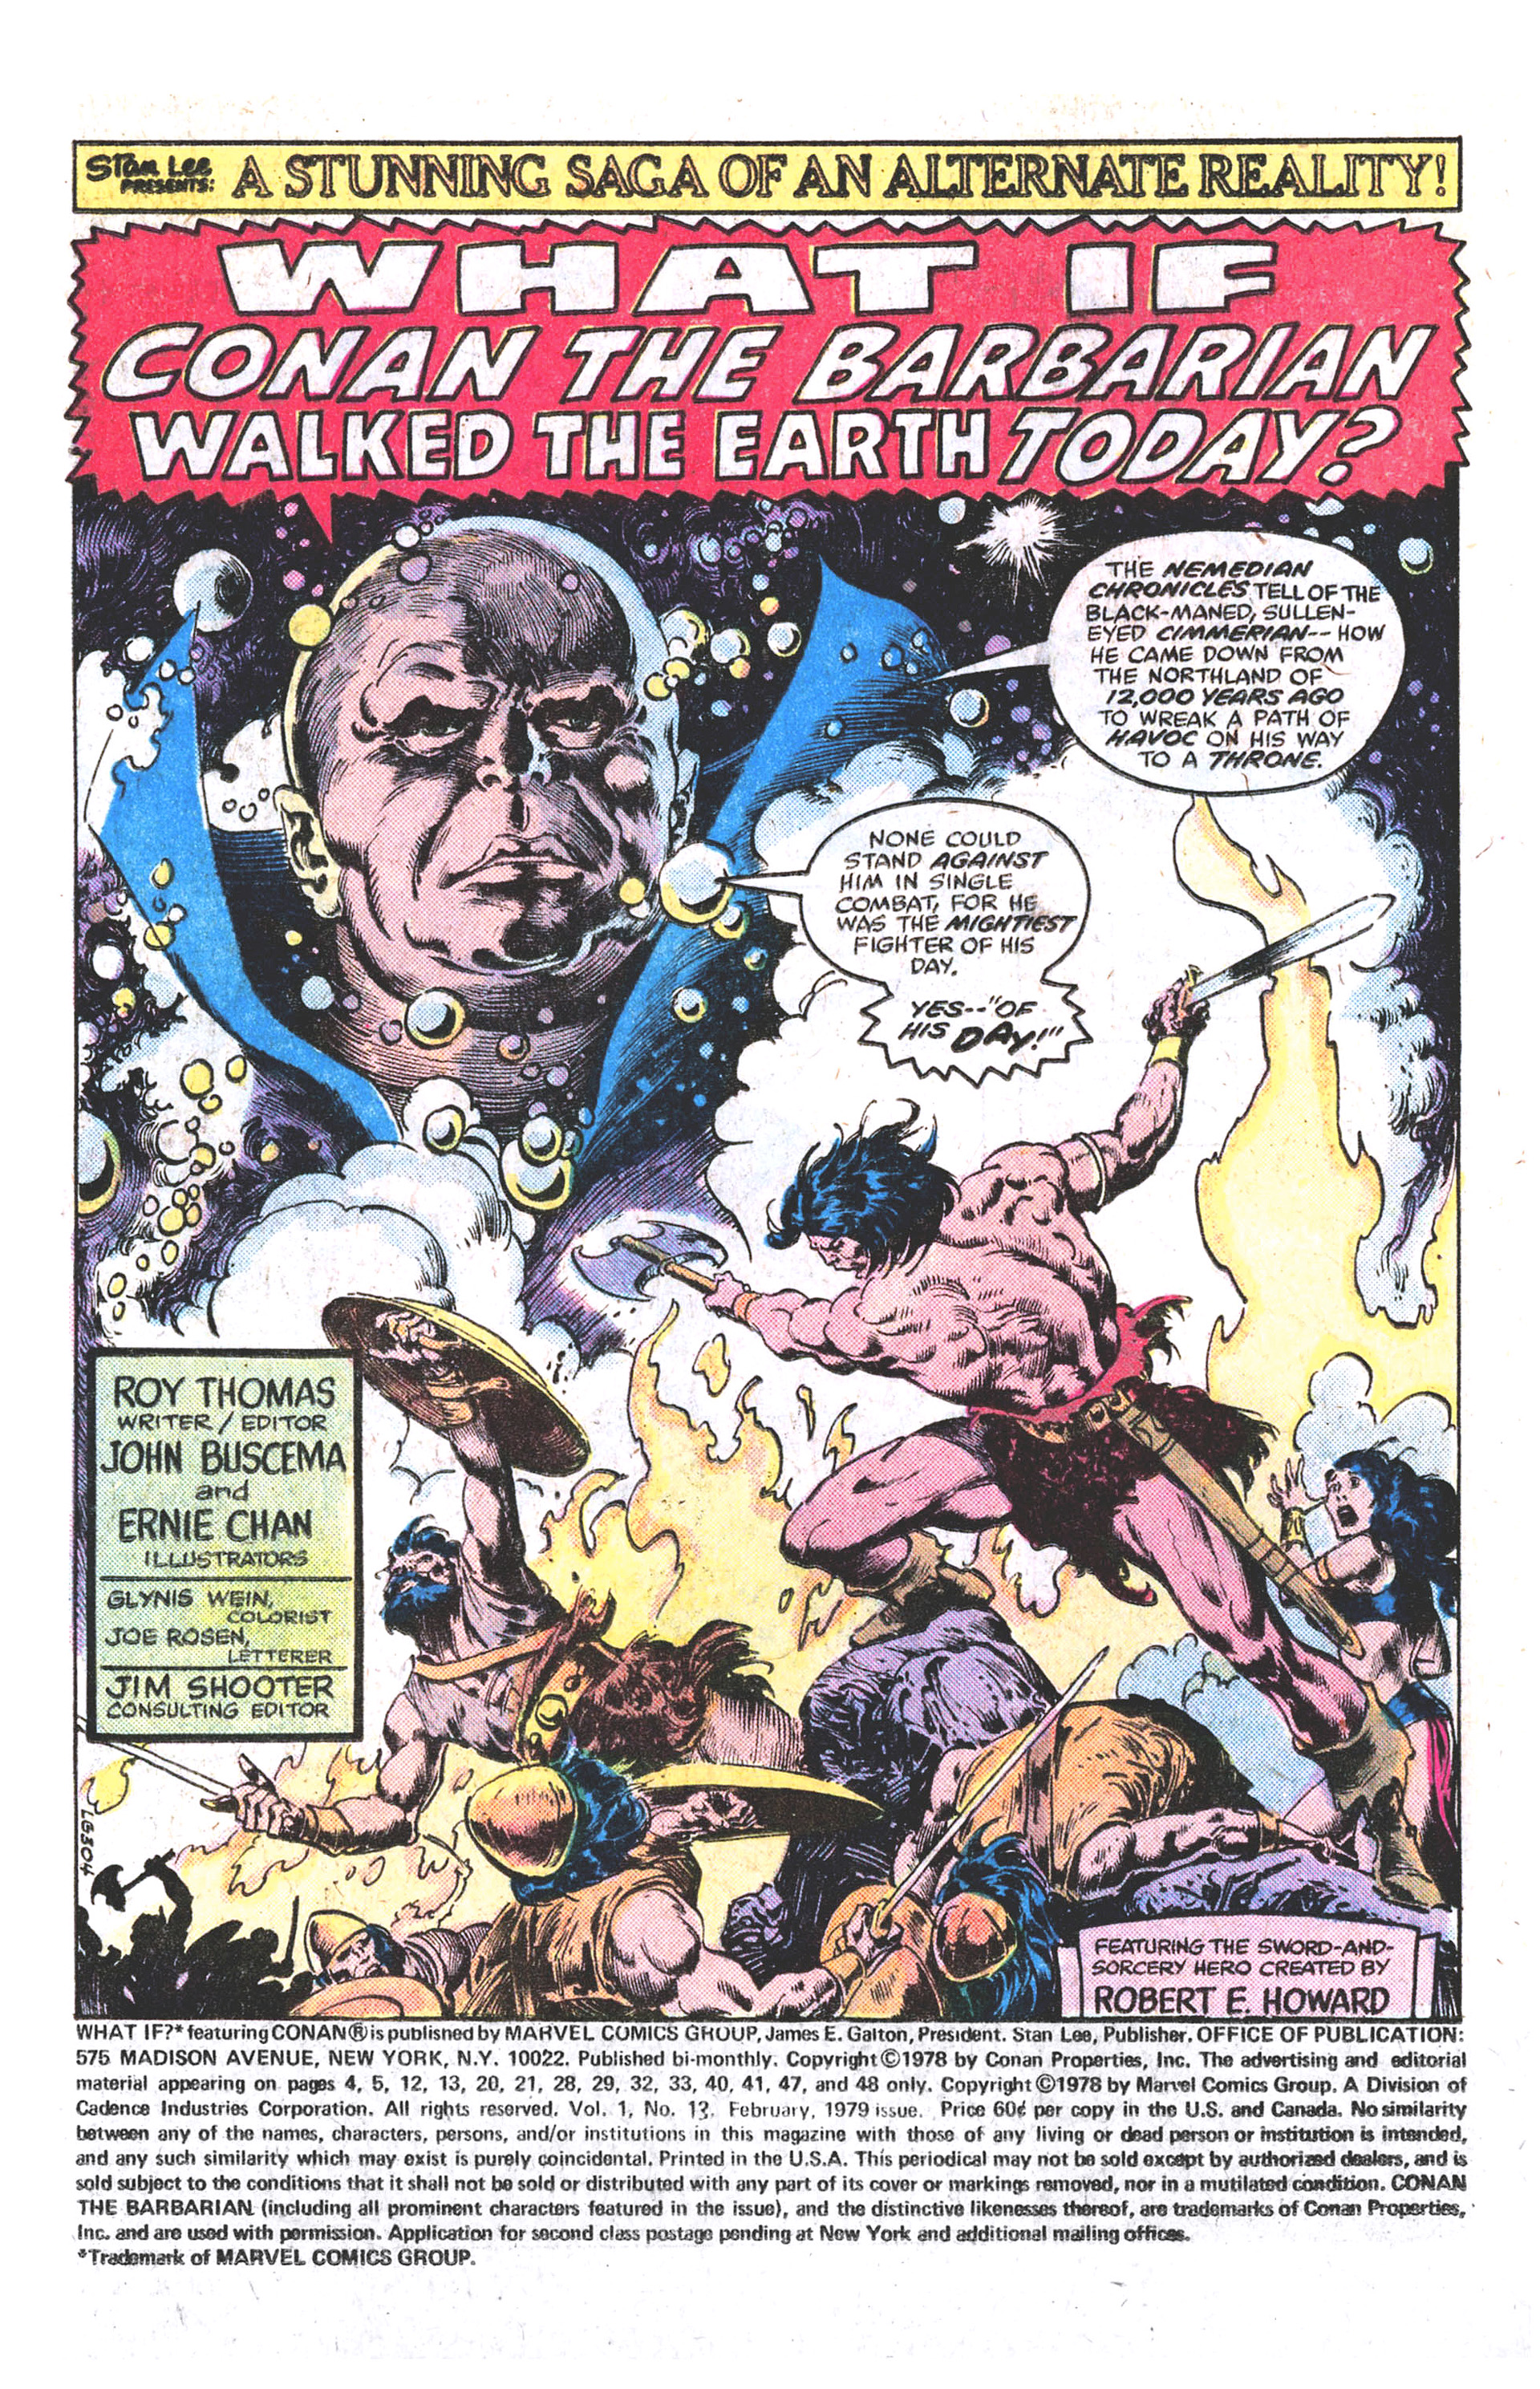 Read online What If? (1977) comic -  Issue #13 - Conan The Barbarian walked the Earth Today - 2